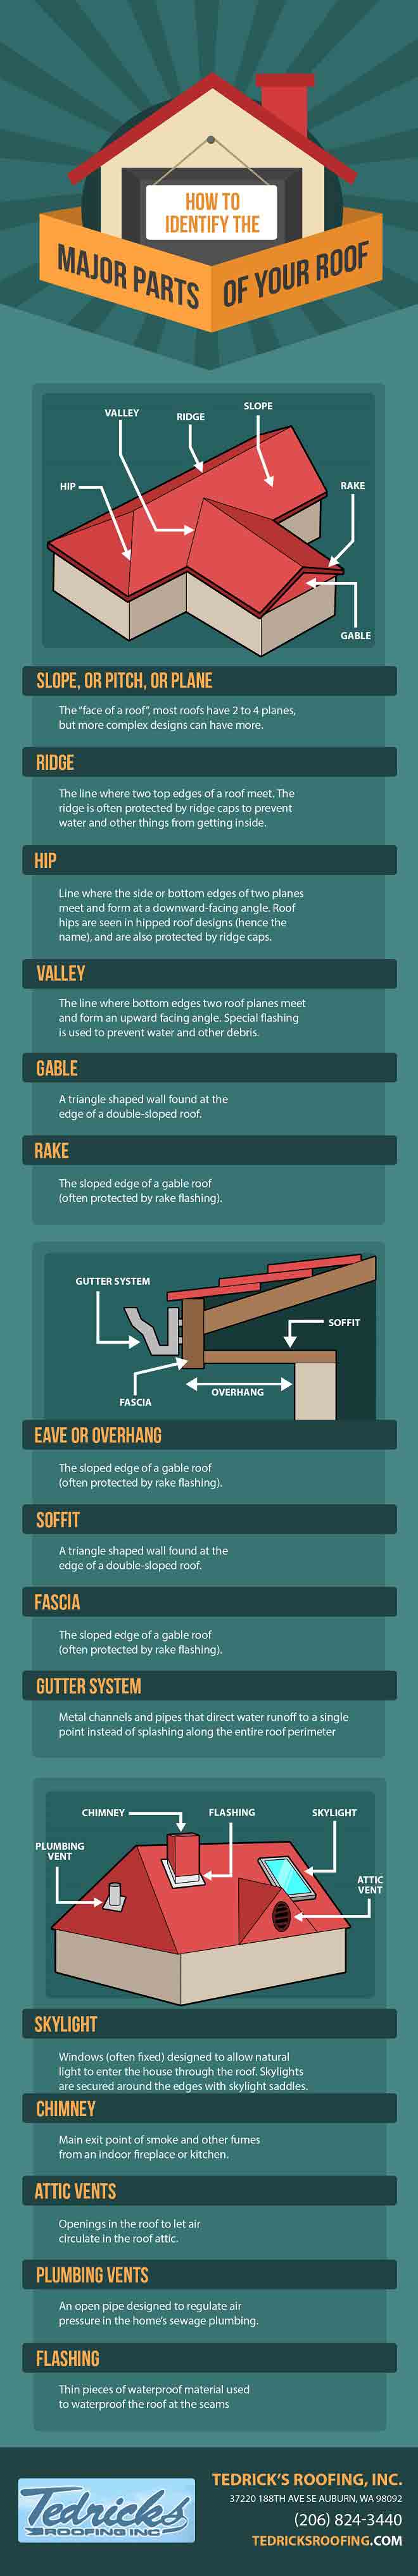 Infographic: How to Identify the Major Parts of Your Roof